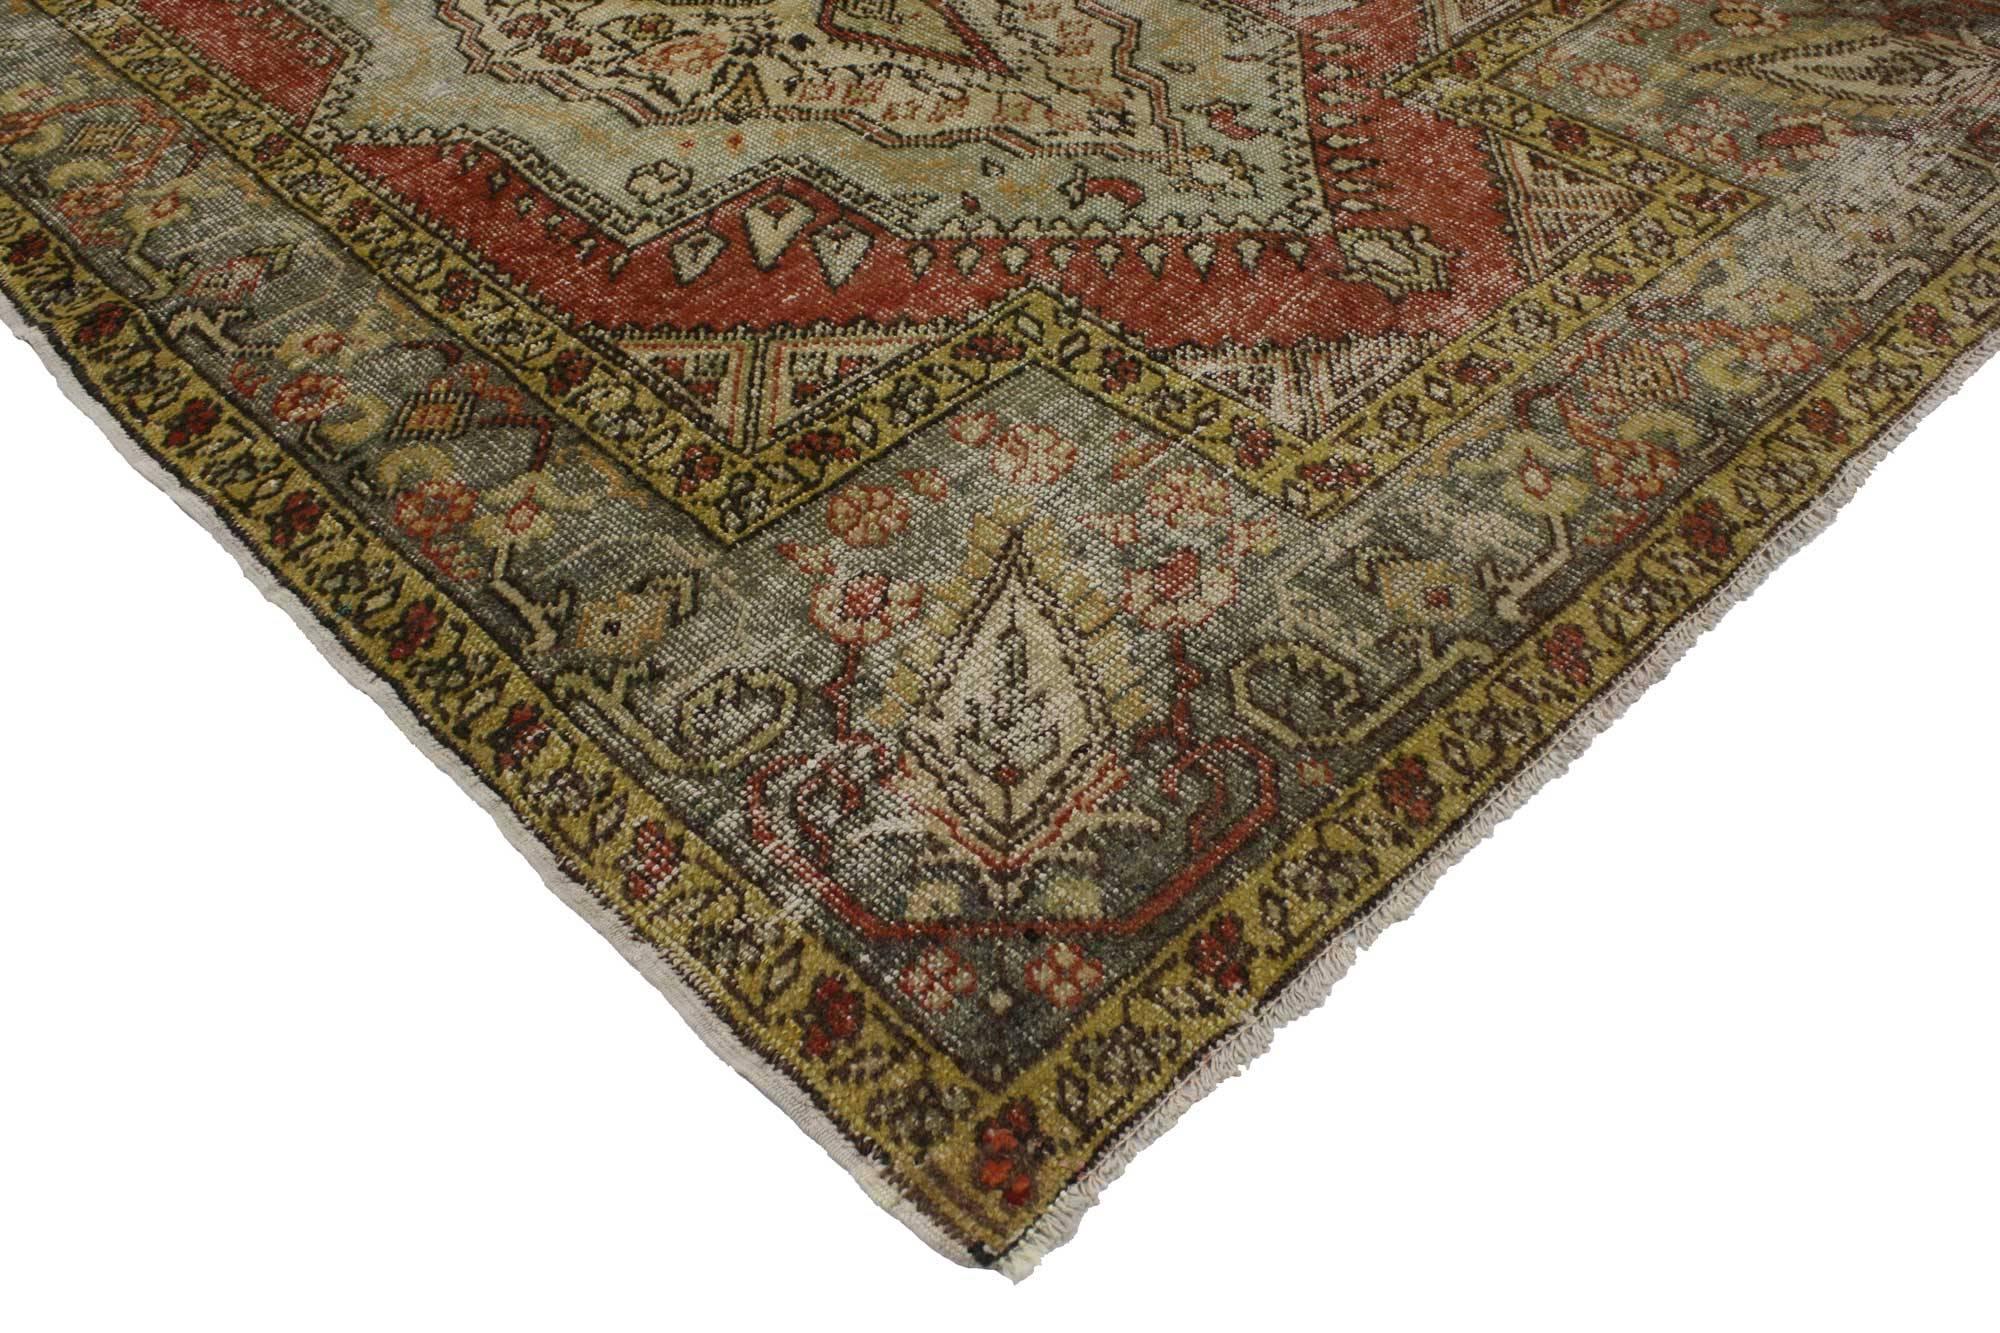 51738 Distressed Vintage Turkish Oushak Rug with Modern Rustic Style 04'02 x 06'00. With its perfectly worn-in charm and edgy elements, this hand-knotted wool distressed vintage Turkish Oushak rug will create a warm, lived-in look and take on a